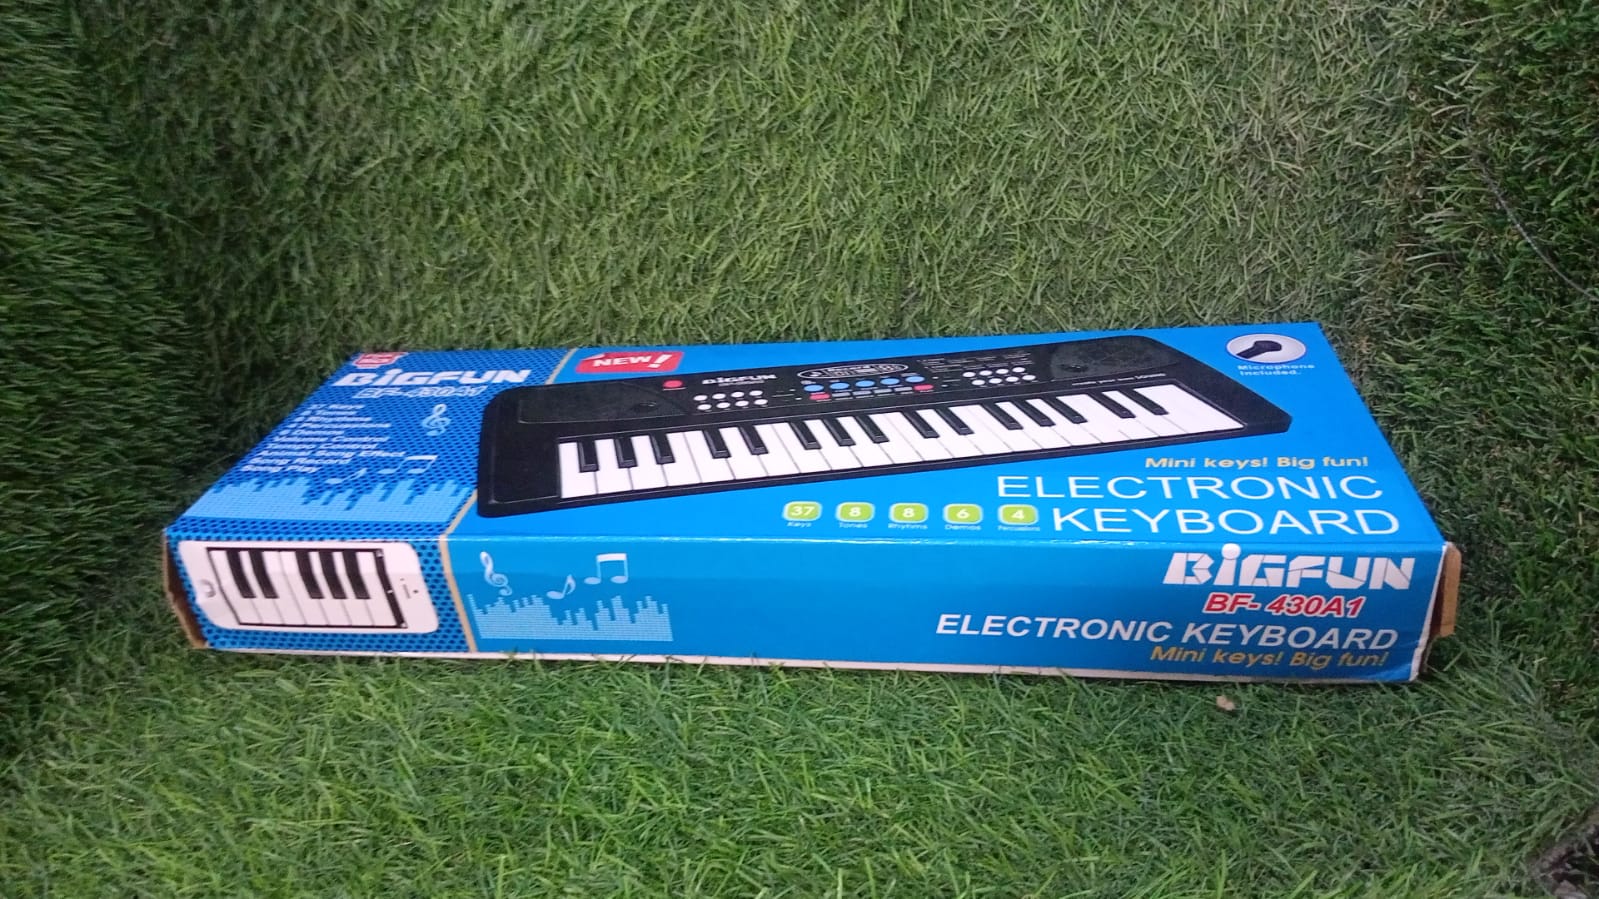 4515 Piano Musical Keyboard With Mic 37 Music Key Keyboard For Kids Toy